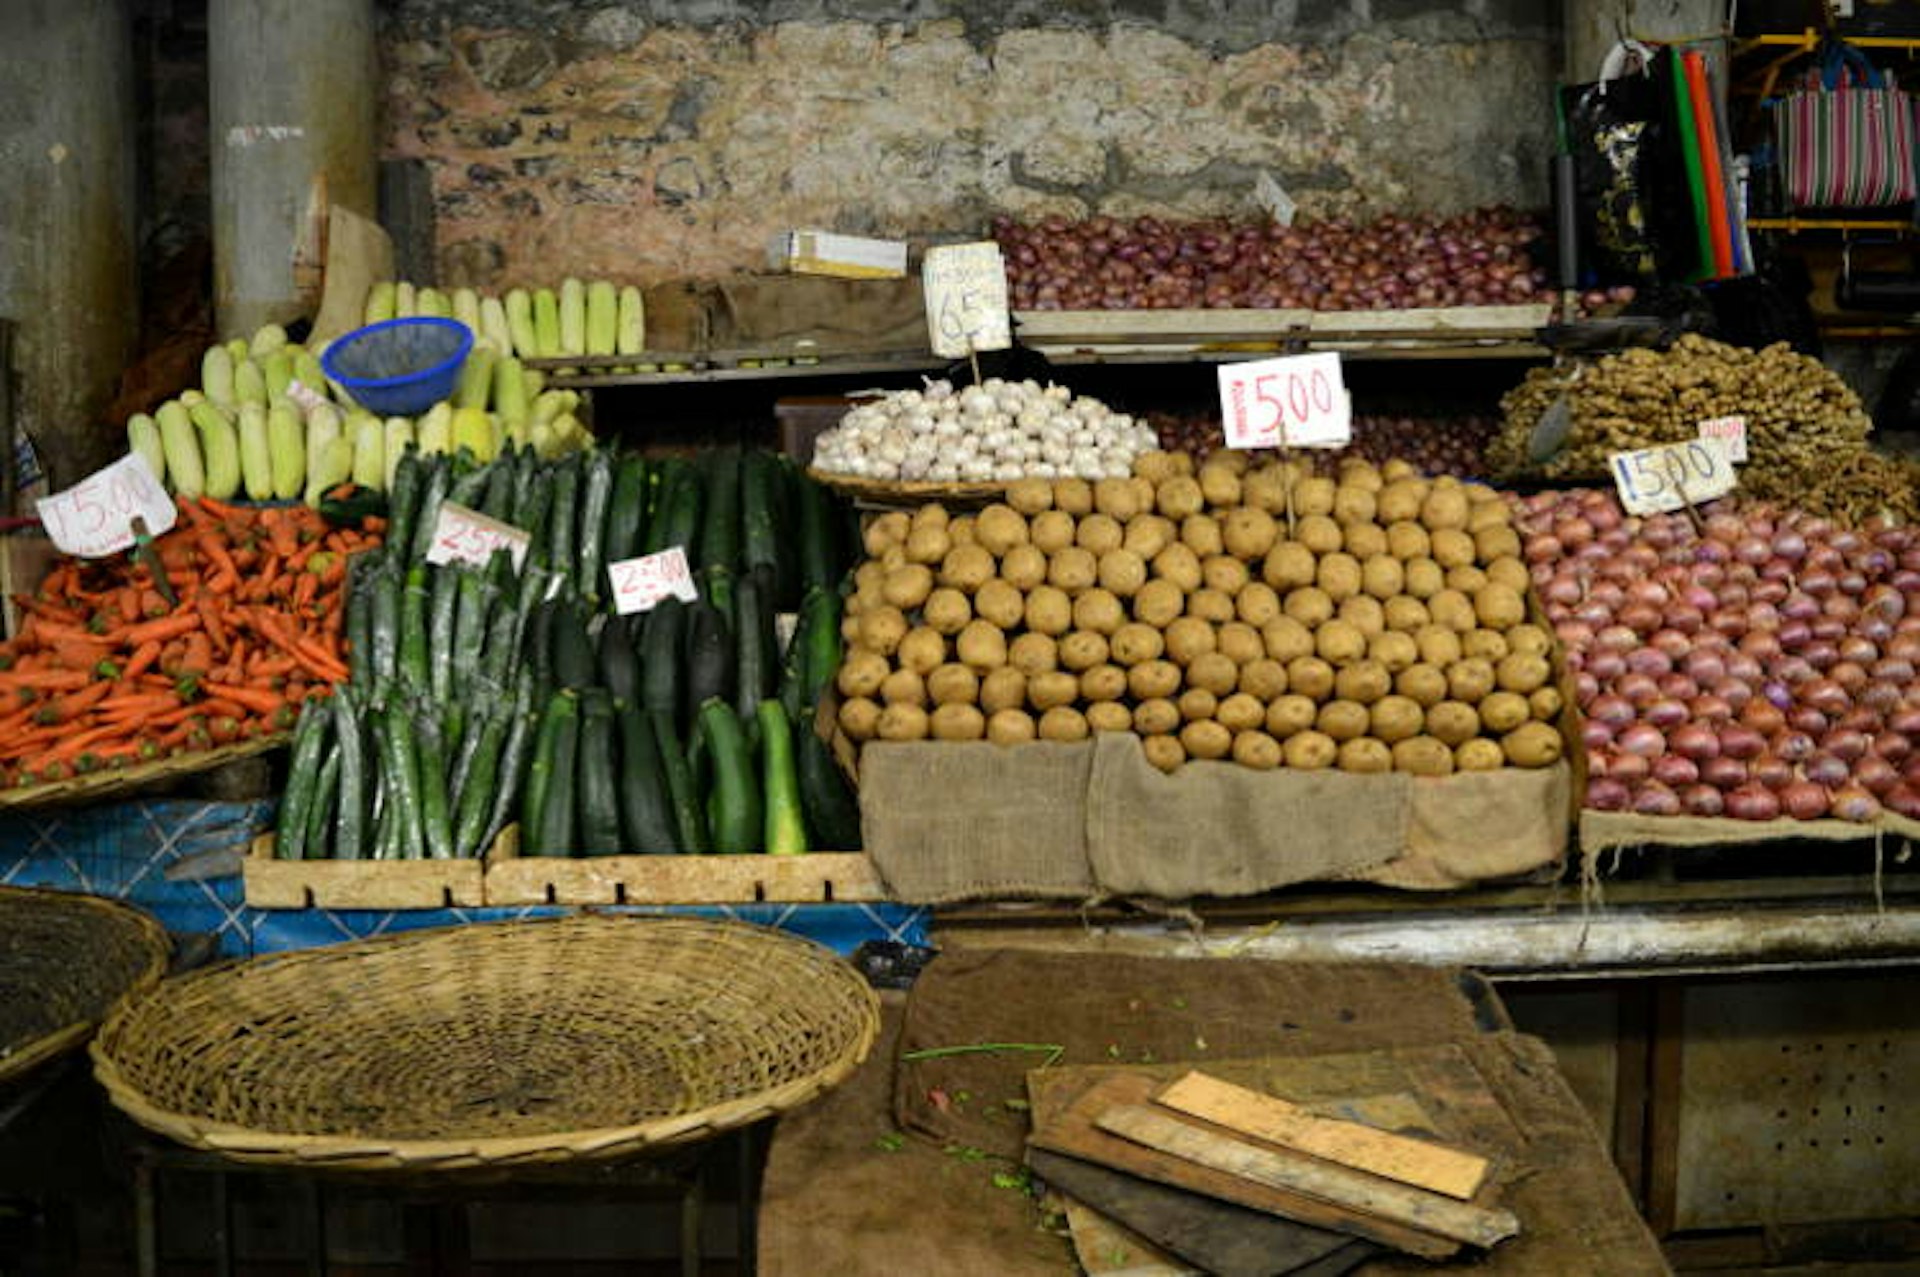 Veg for sale in Port Louis central market, Mauritius. Image by Emma Sparks / Lonely Planet